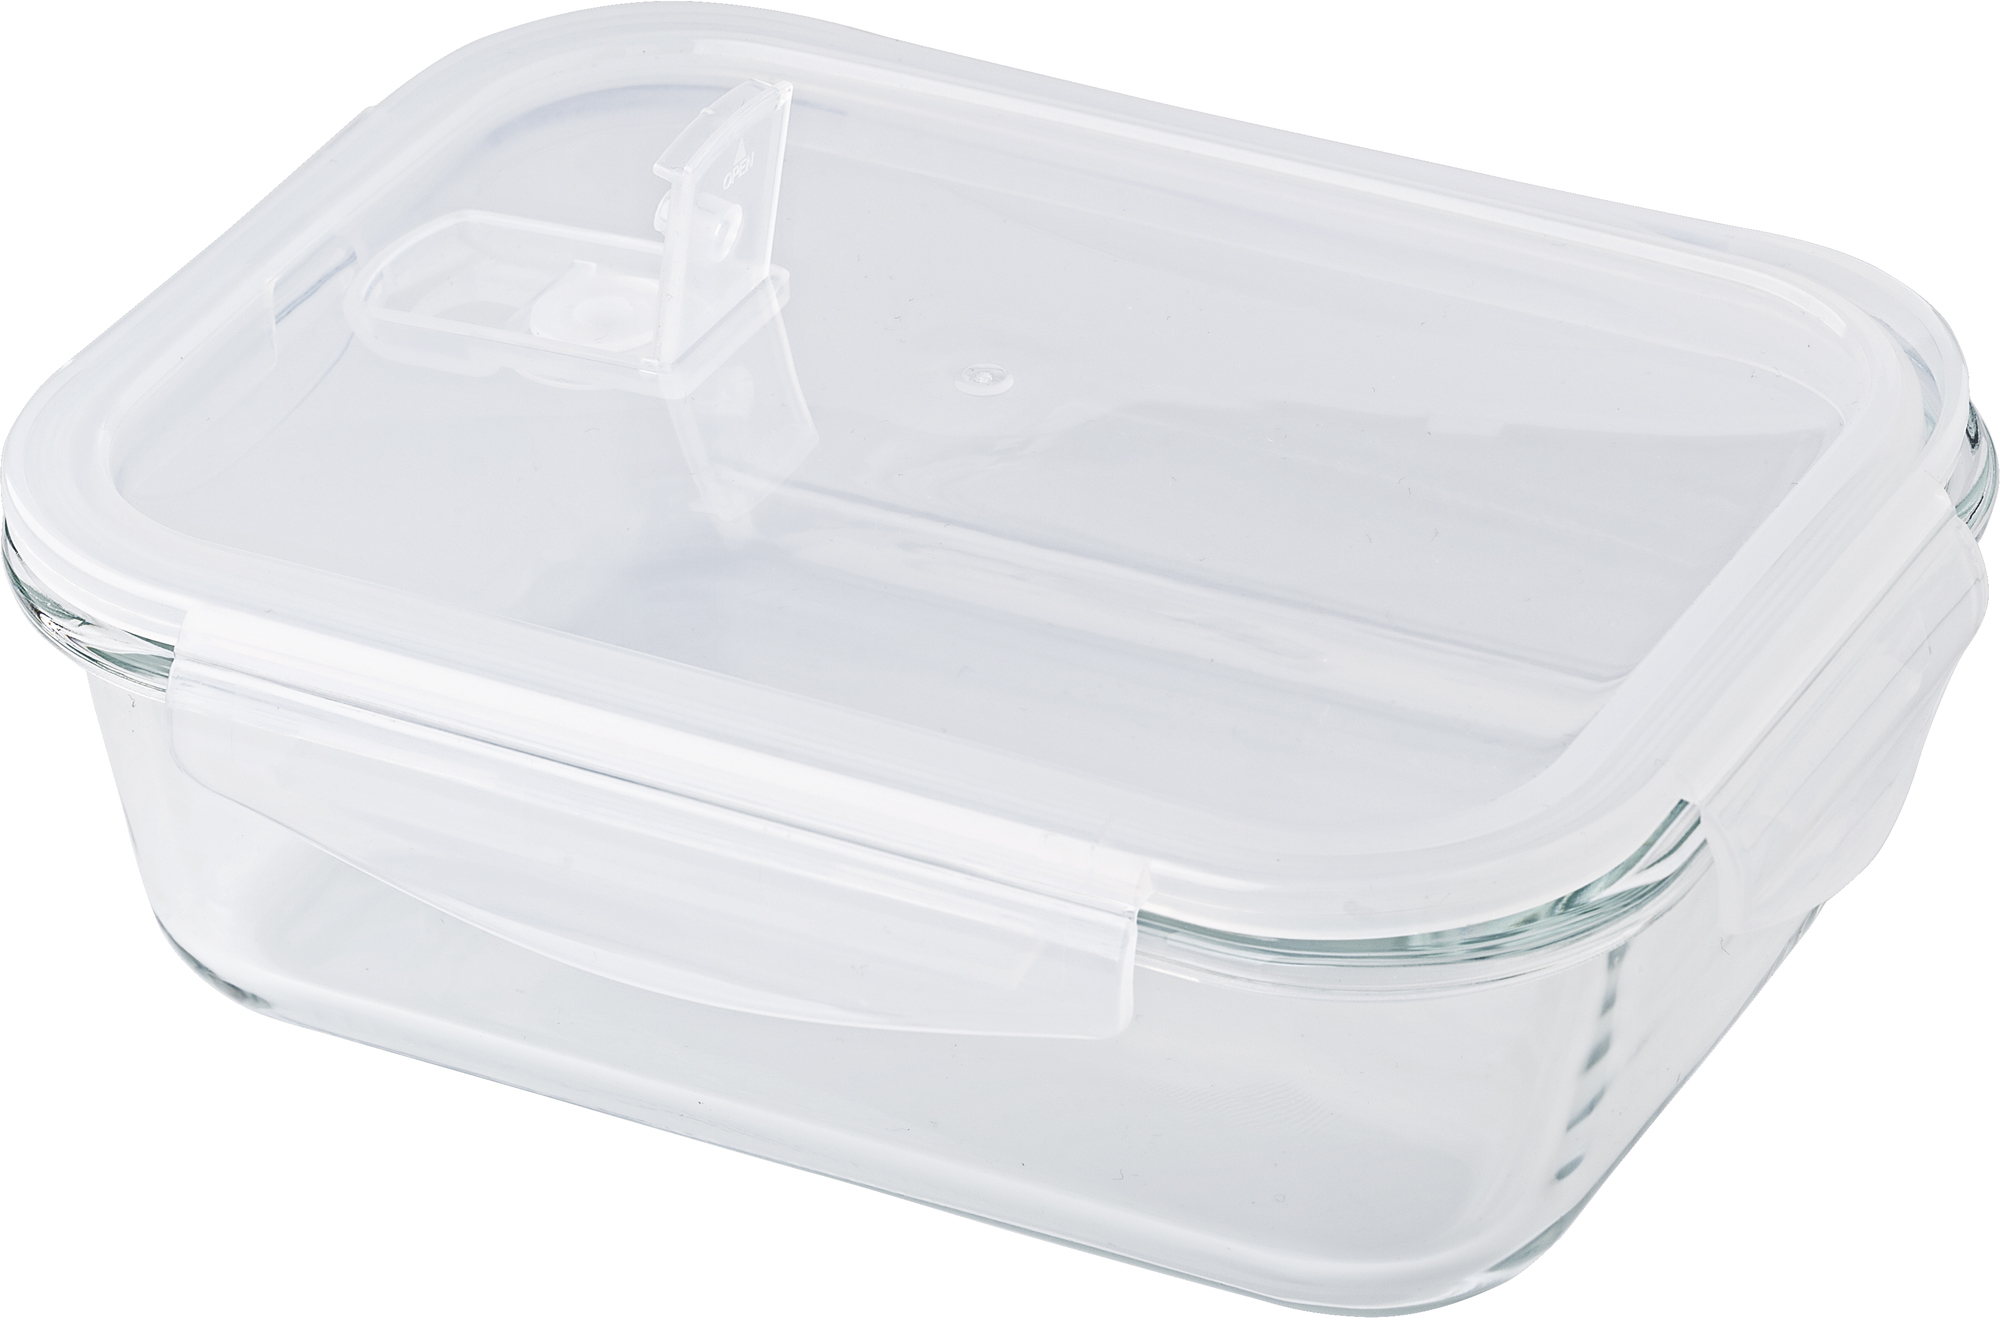 000000737224 970999999 3d045 rgt pro02 2022 fal - Glass lunch box